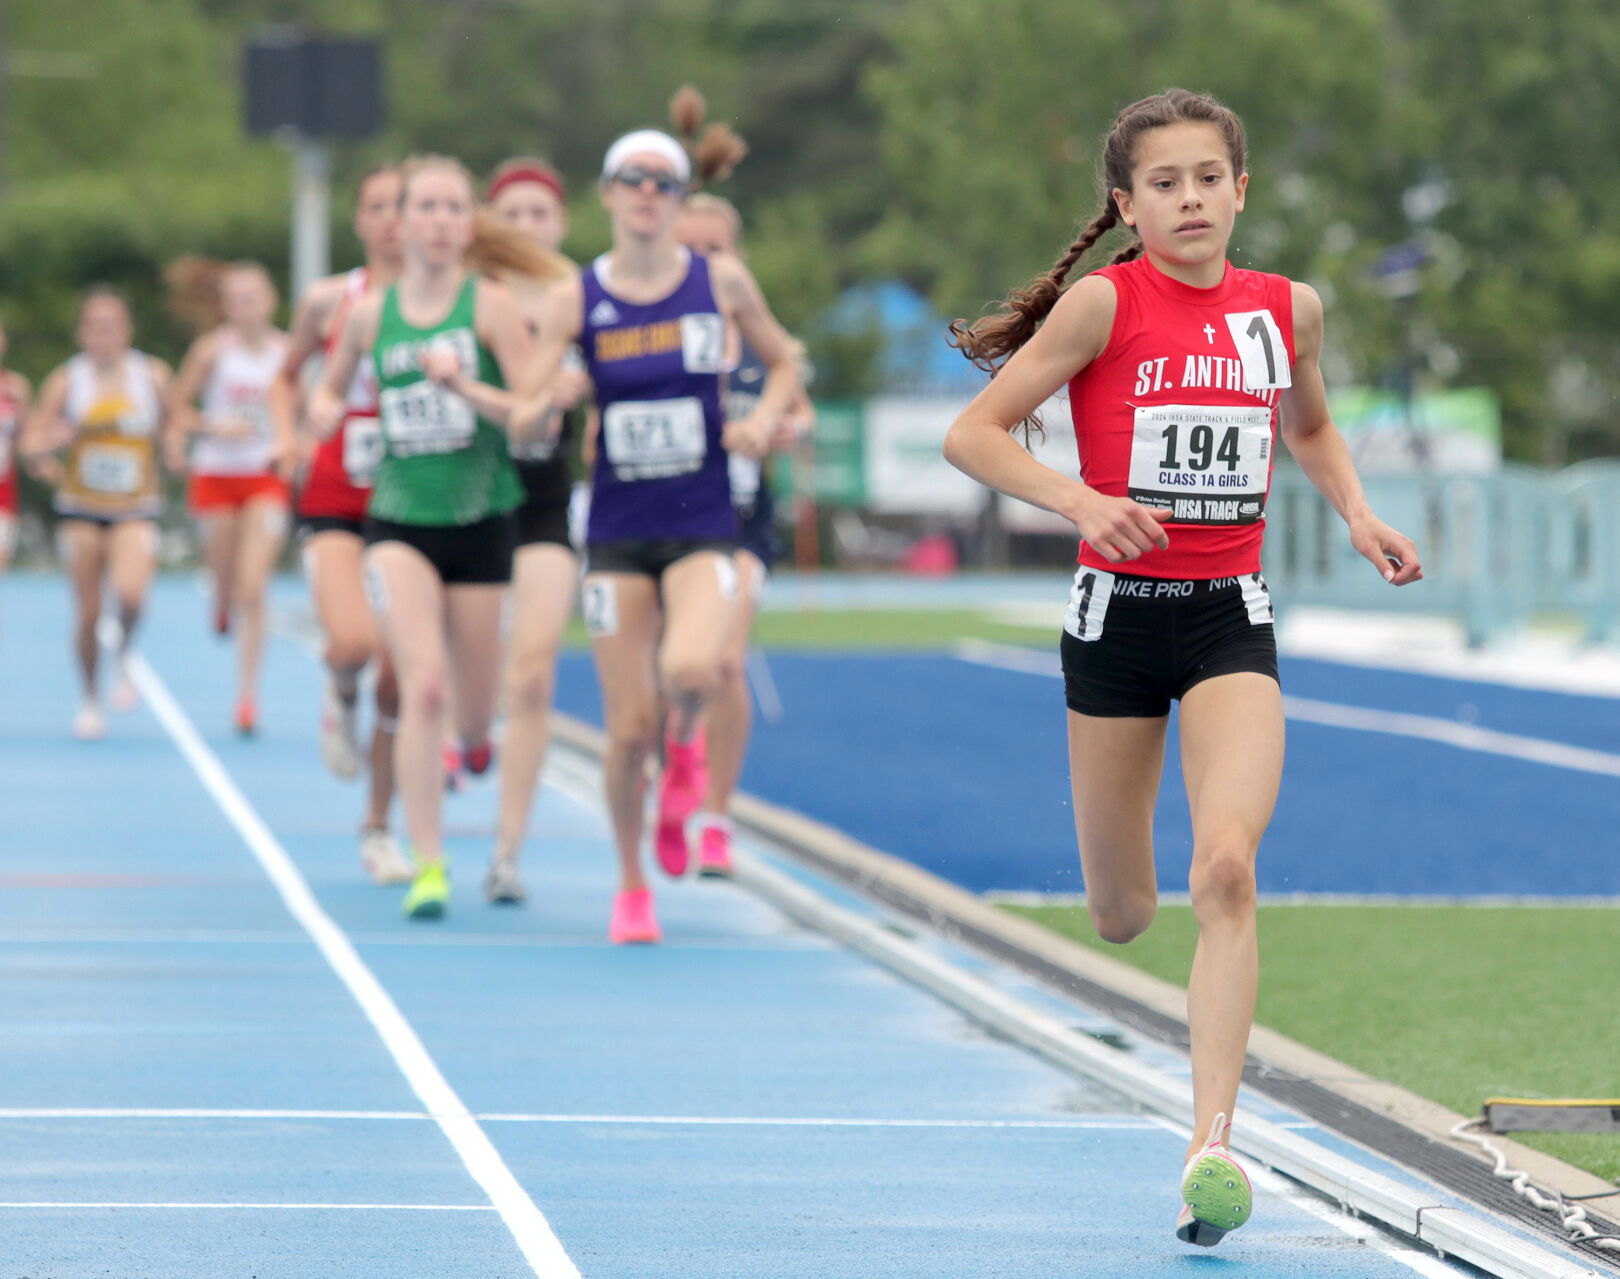 Area Girls Qualify for IHSA Track and Field State Finals: Keller Leads the Pack